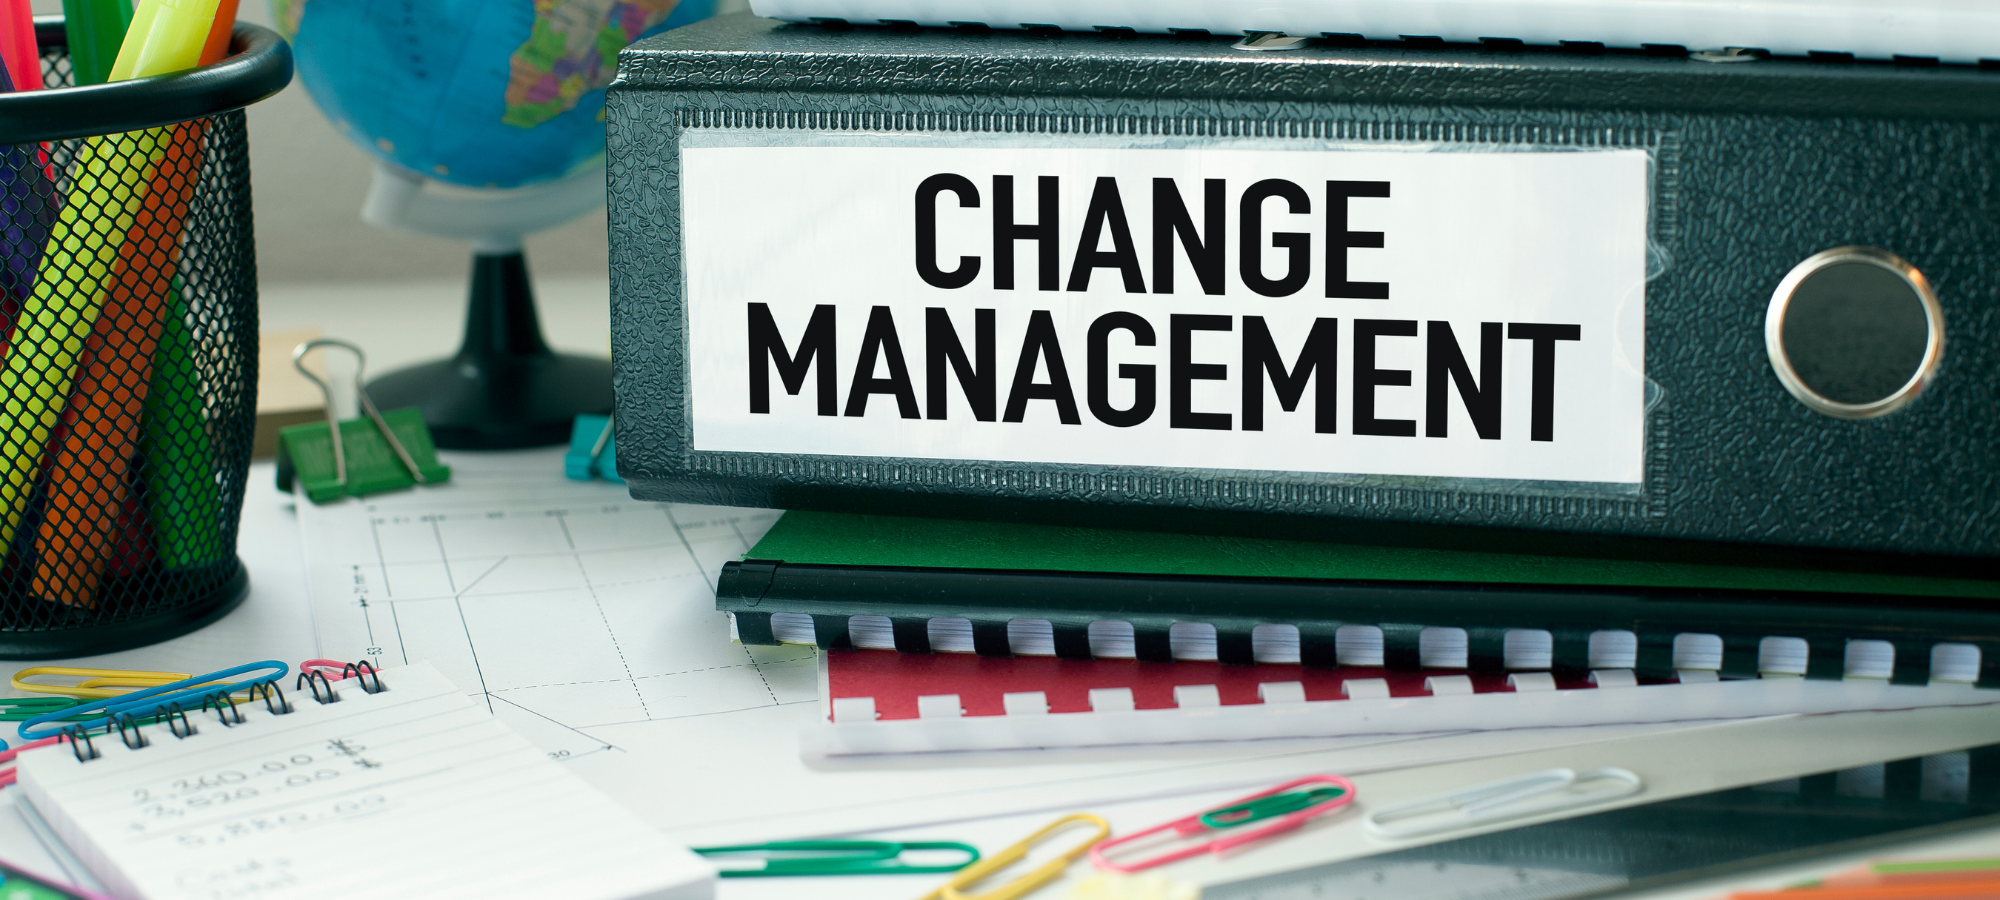 Change Management and Putting People First